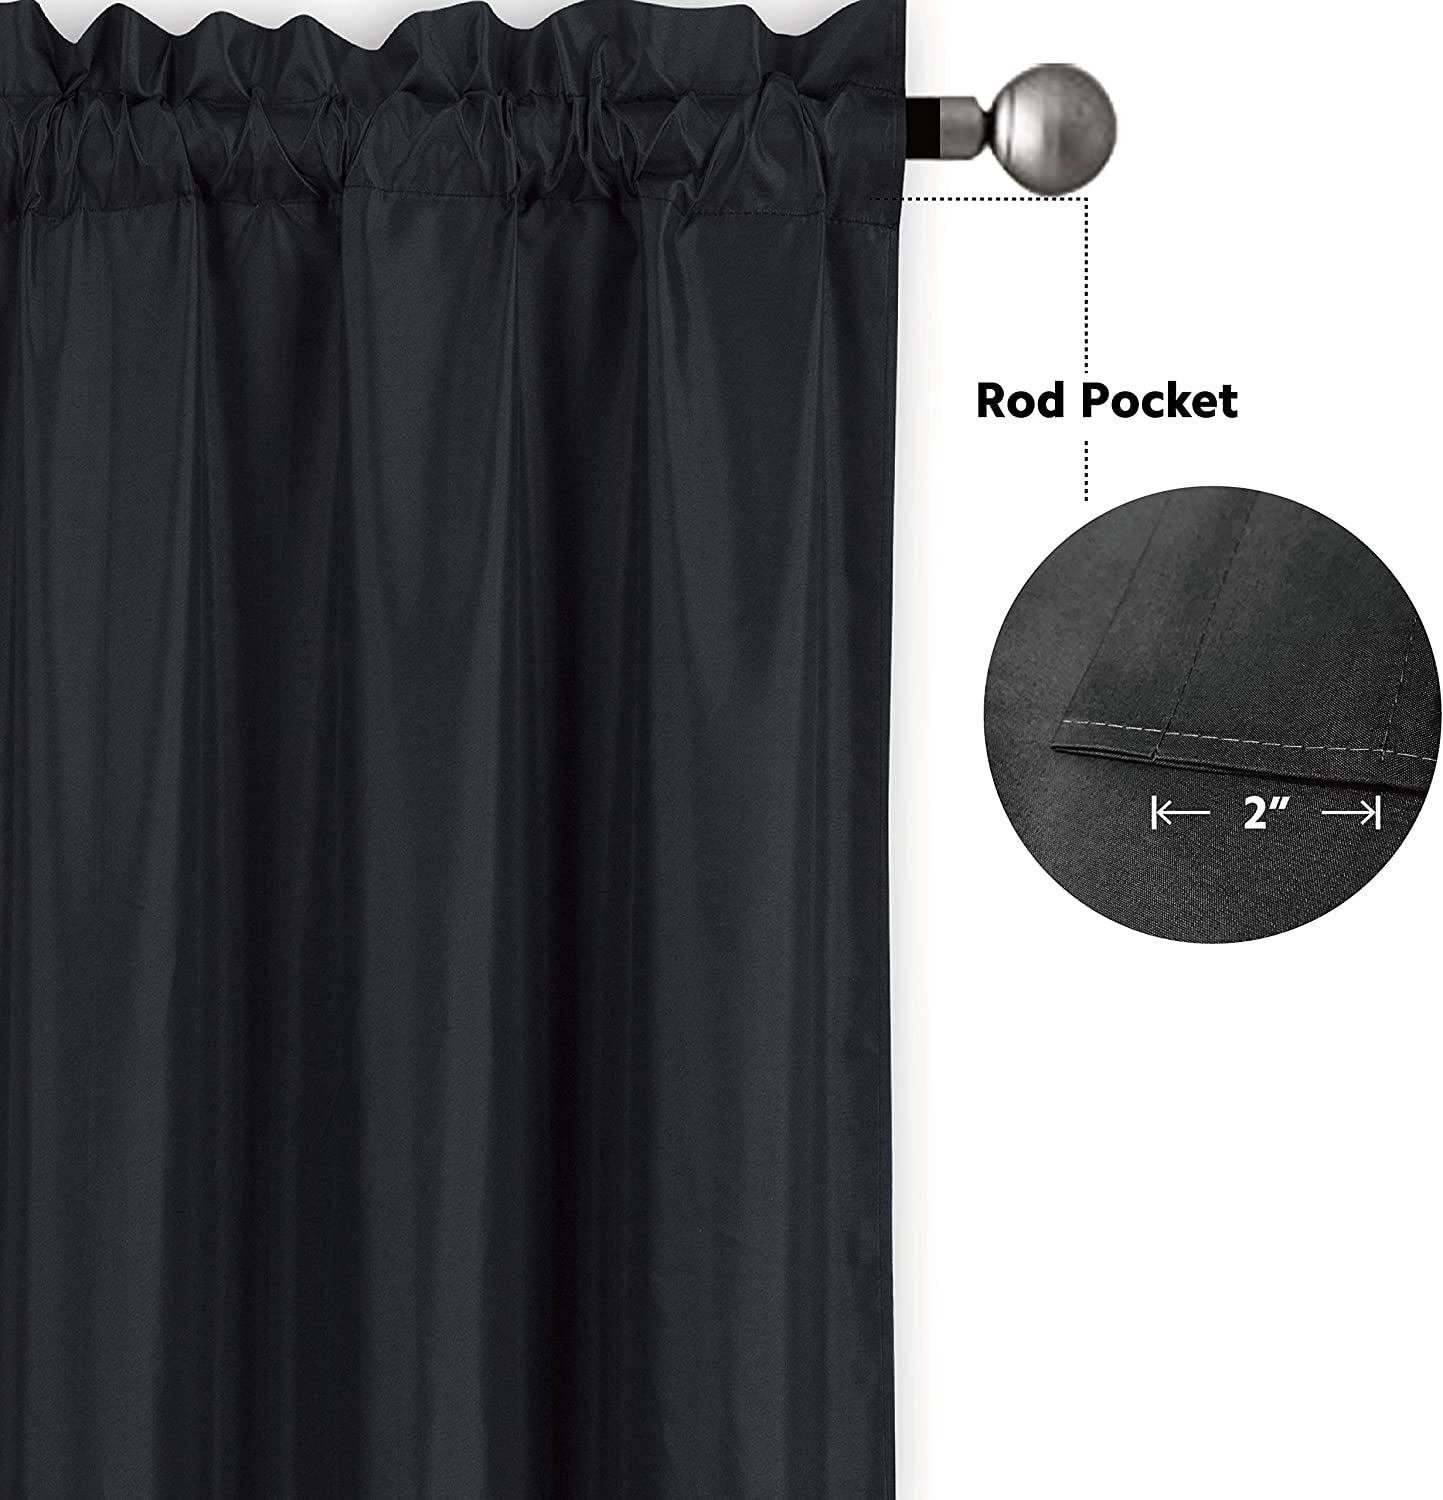 Home Collection 2 Panels 100% Blackout Curtain Set Solid Color with Rod Pocket Short Tier Drapes for Kitchen, Dinning Room, Bathroom, Bedroom,Living Room Window New (58” Wide X 23” Long, Black)  Kids Zone home Linen   